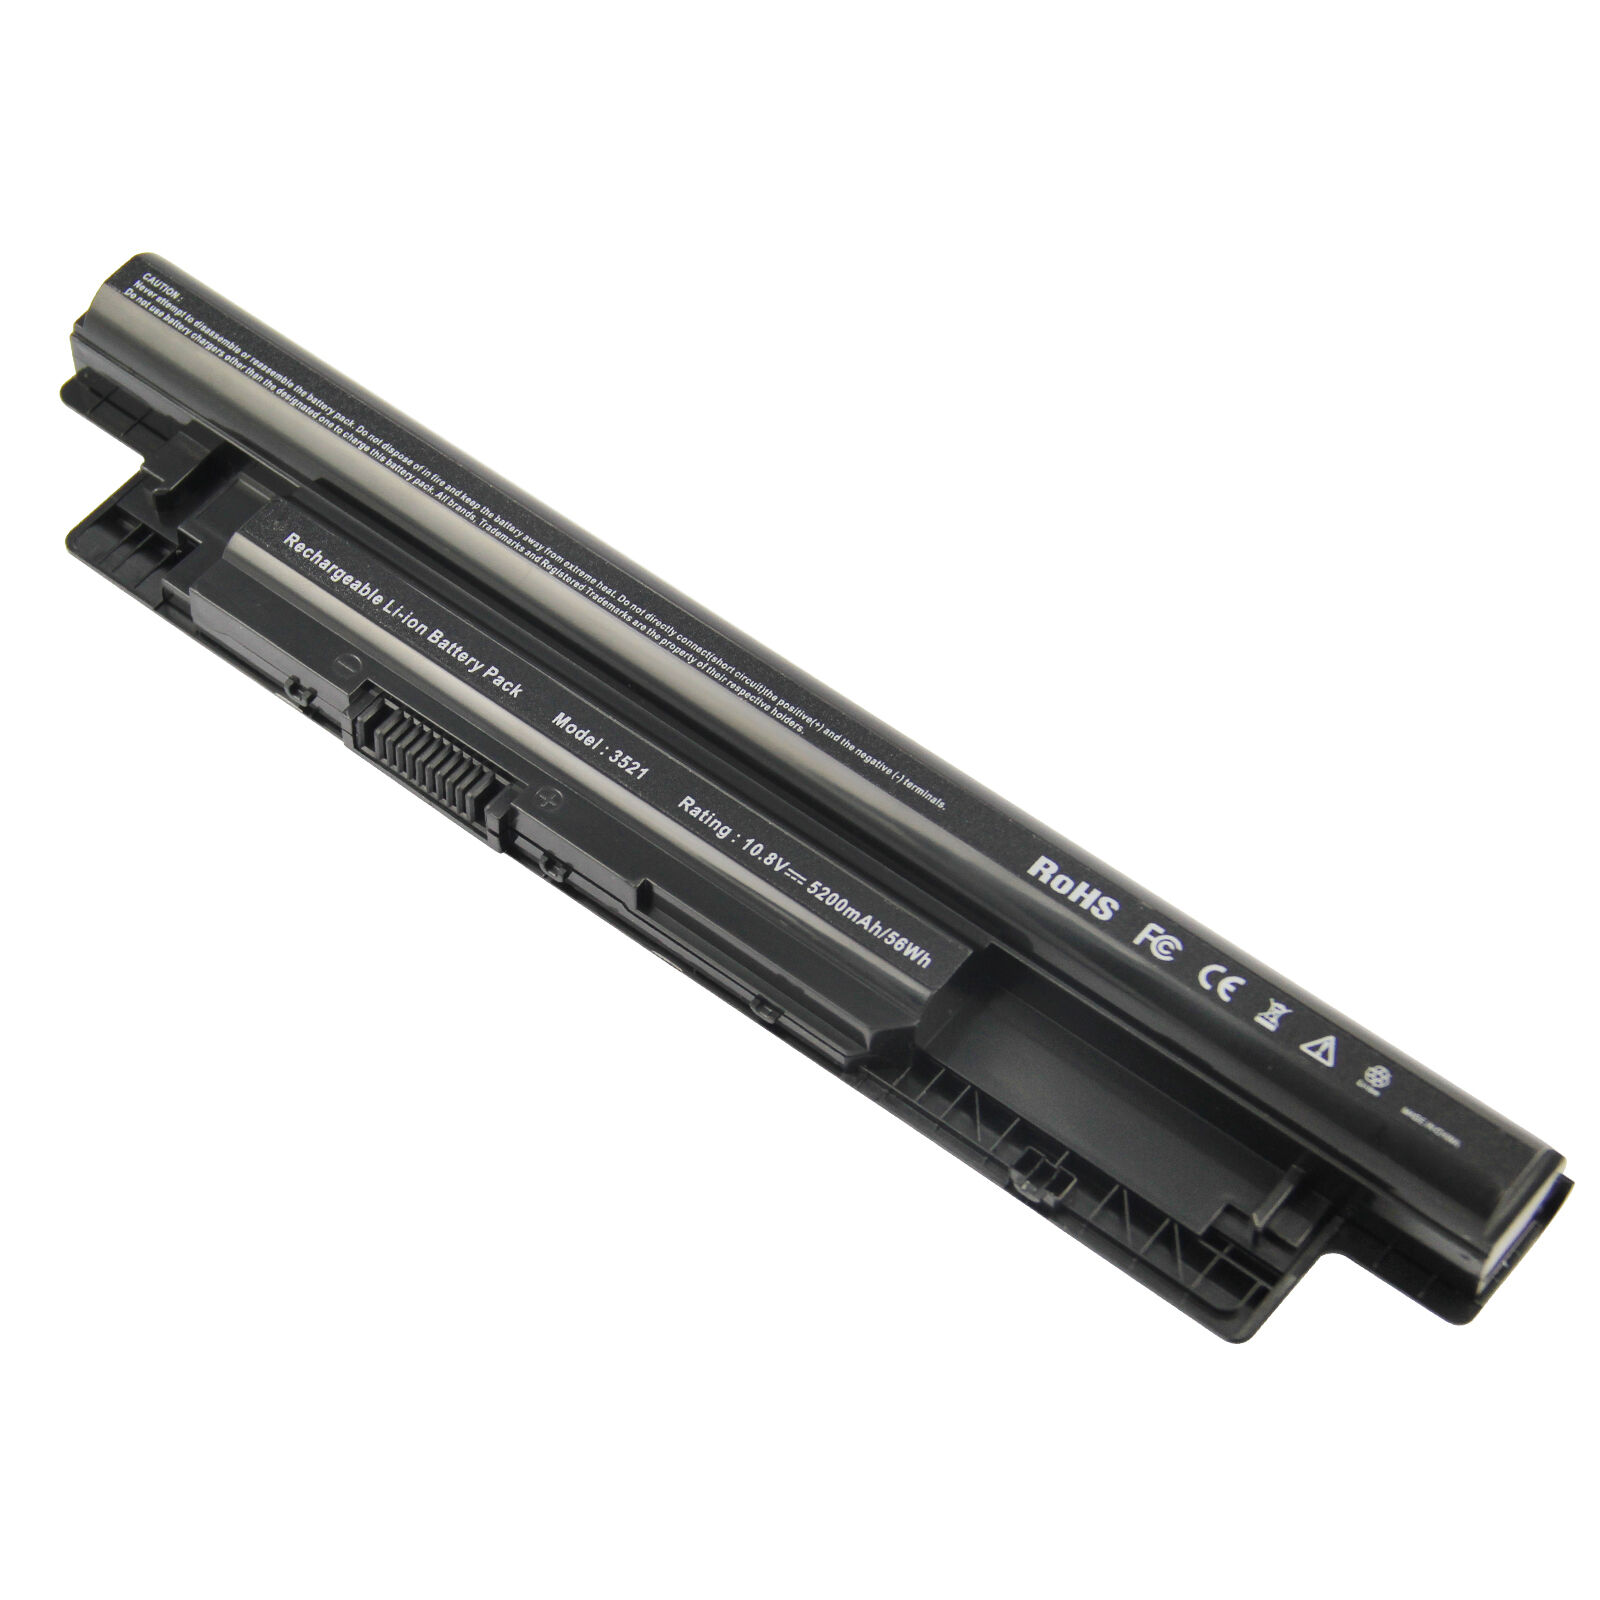 MR90Y XCMRD battery for Dell Inspiron 17 3721 3737 17R 5721 17R 5737 14R 58Wh